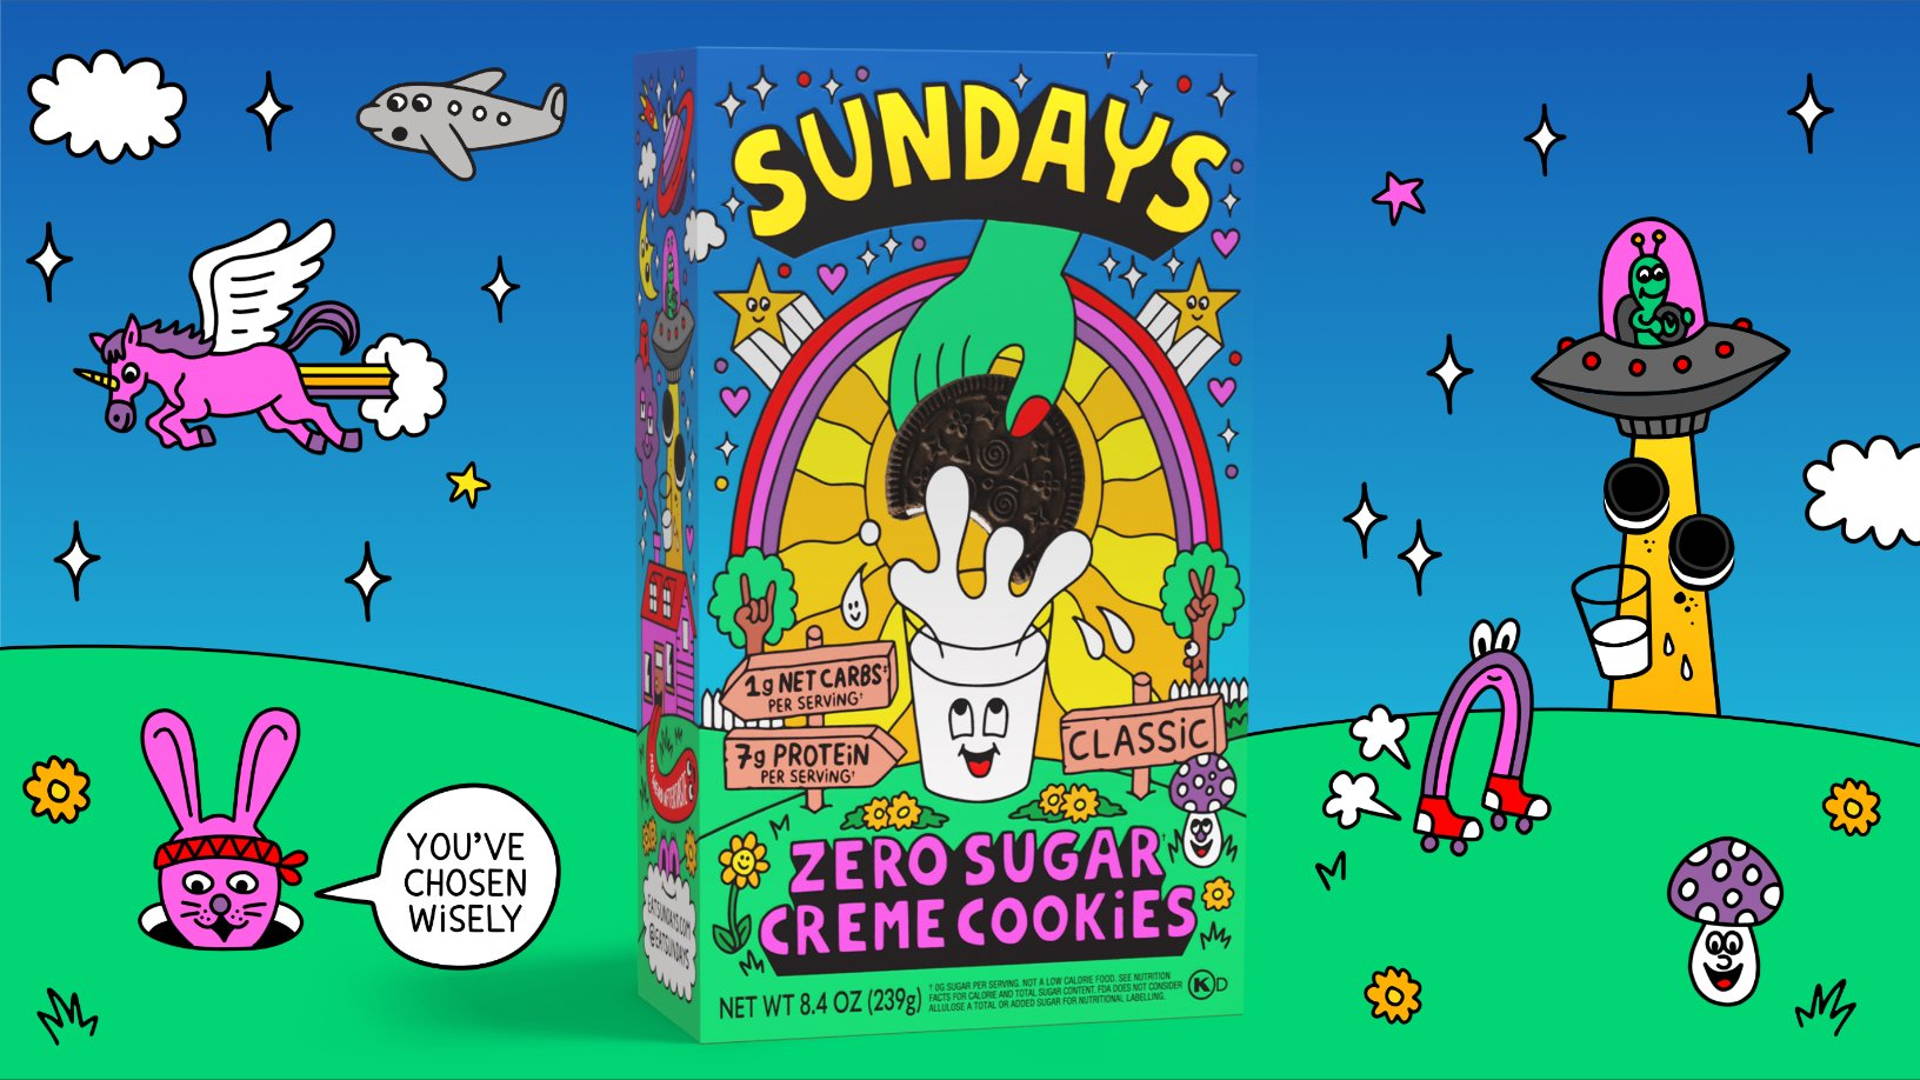 Featured image for Better-For-You Sundays Goes After Big Cookie With Whimsical, Nostalgic Design